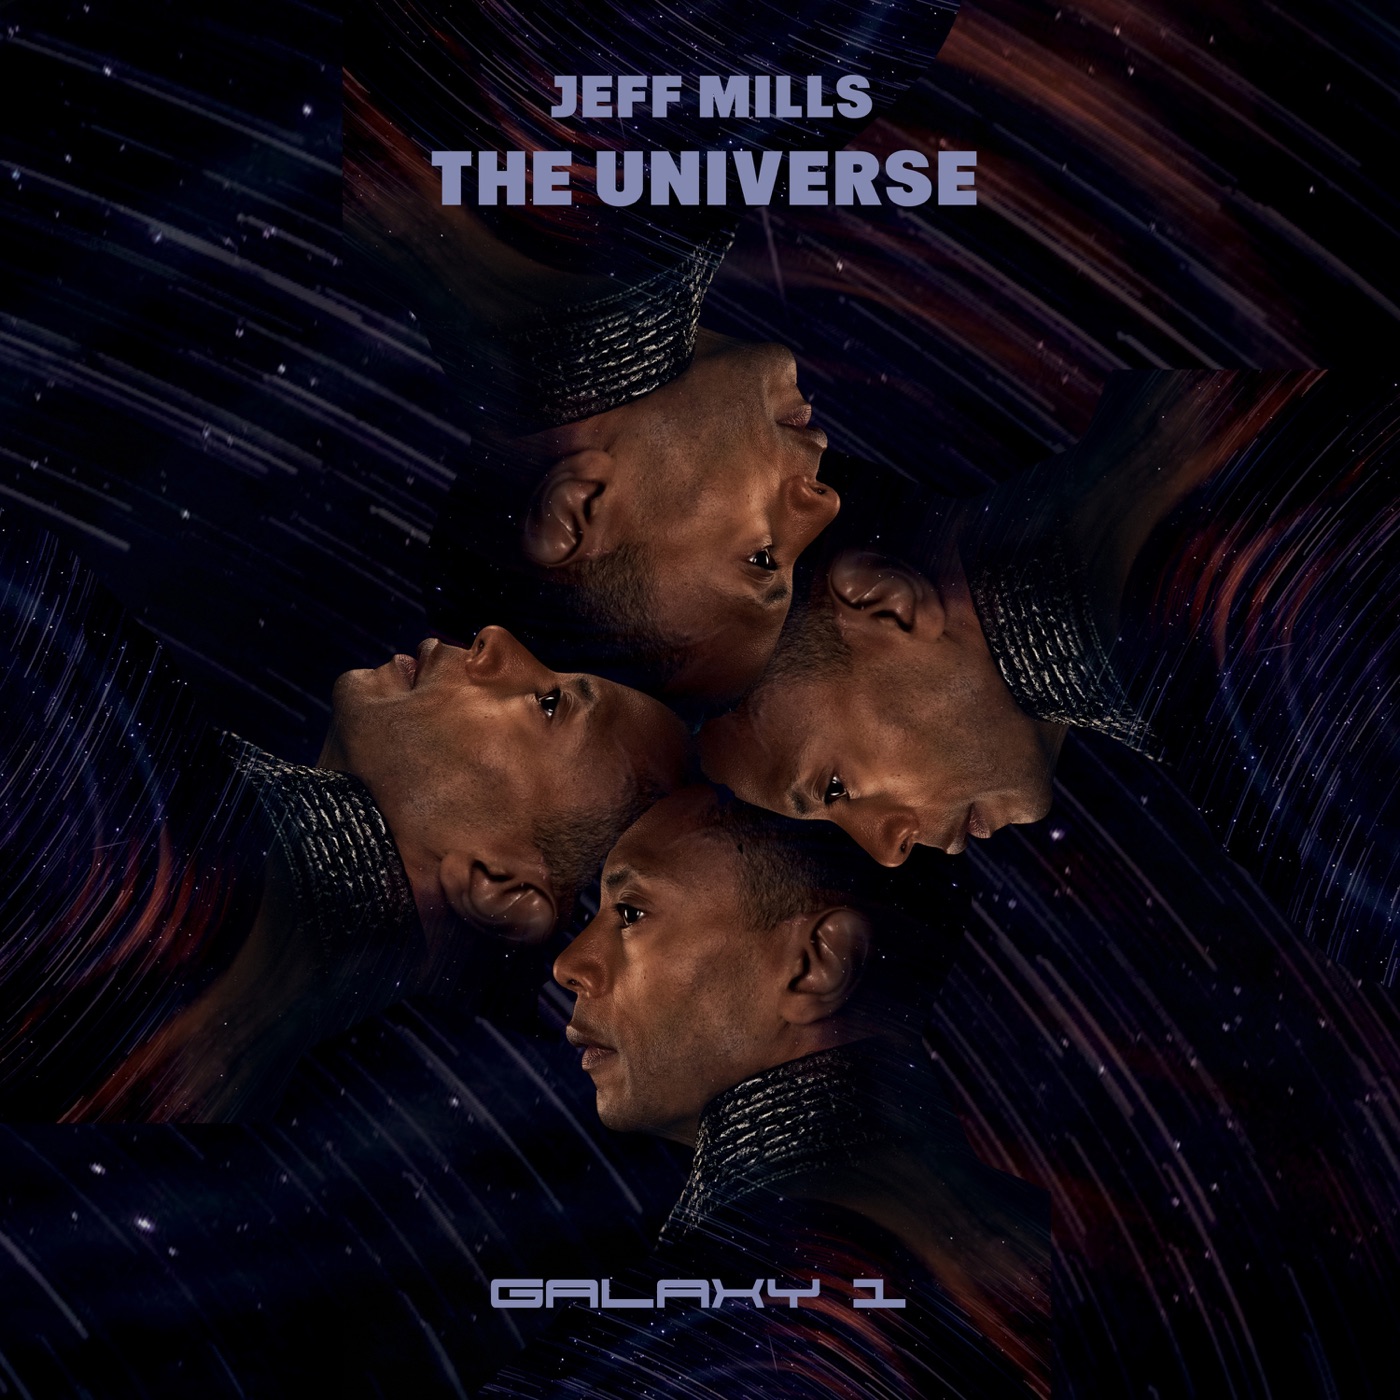 The Universe: Galaxy 1 by Jeff Mills